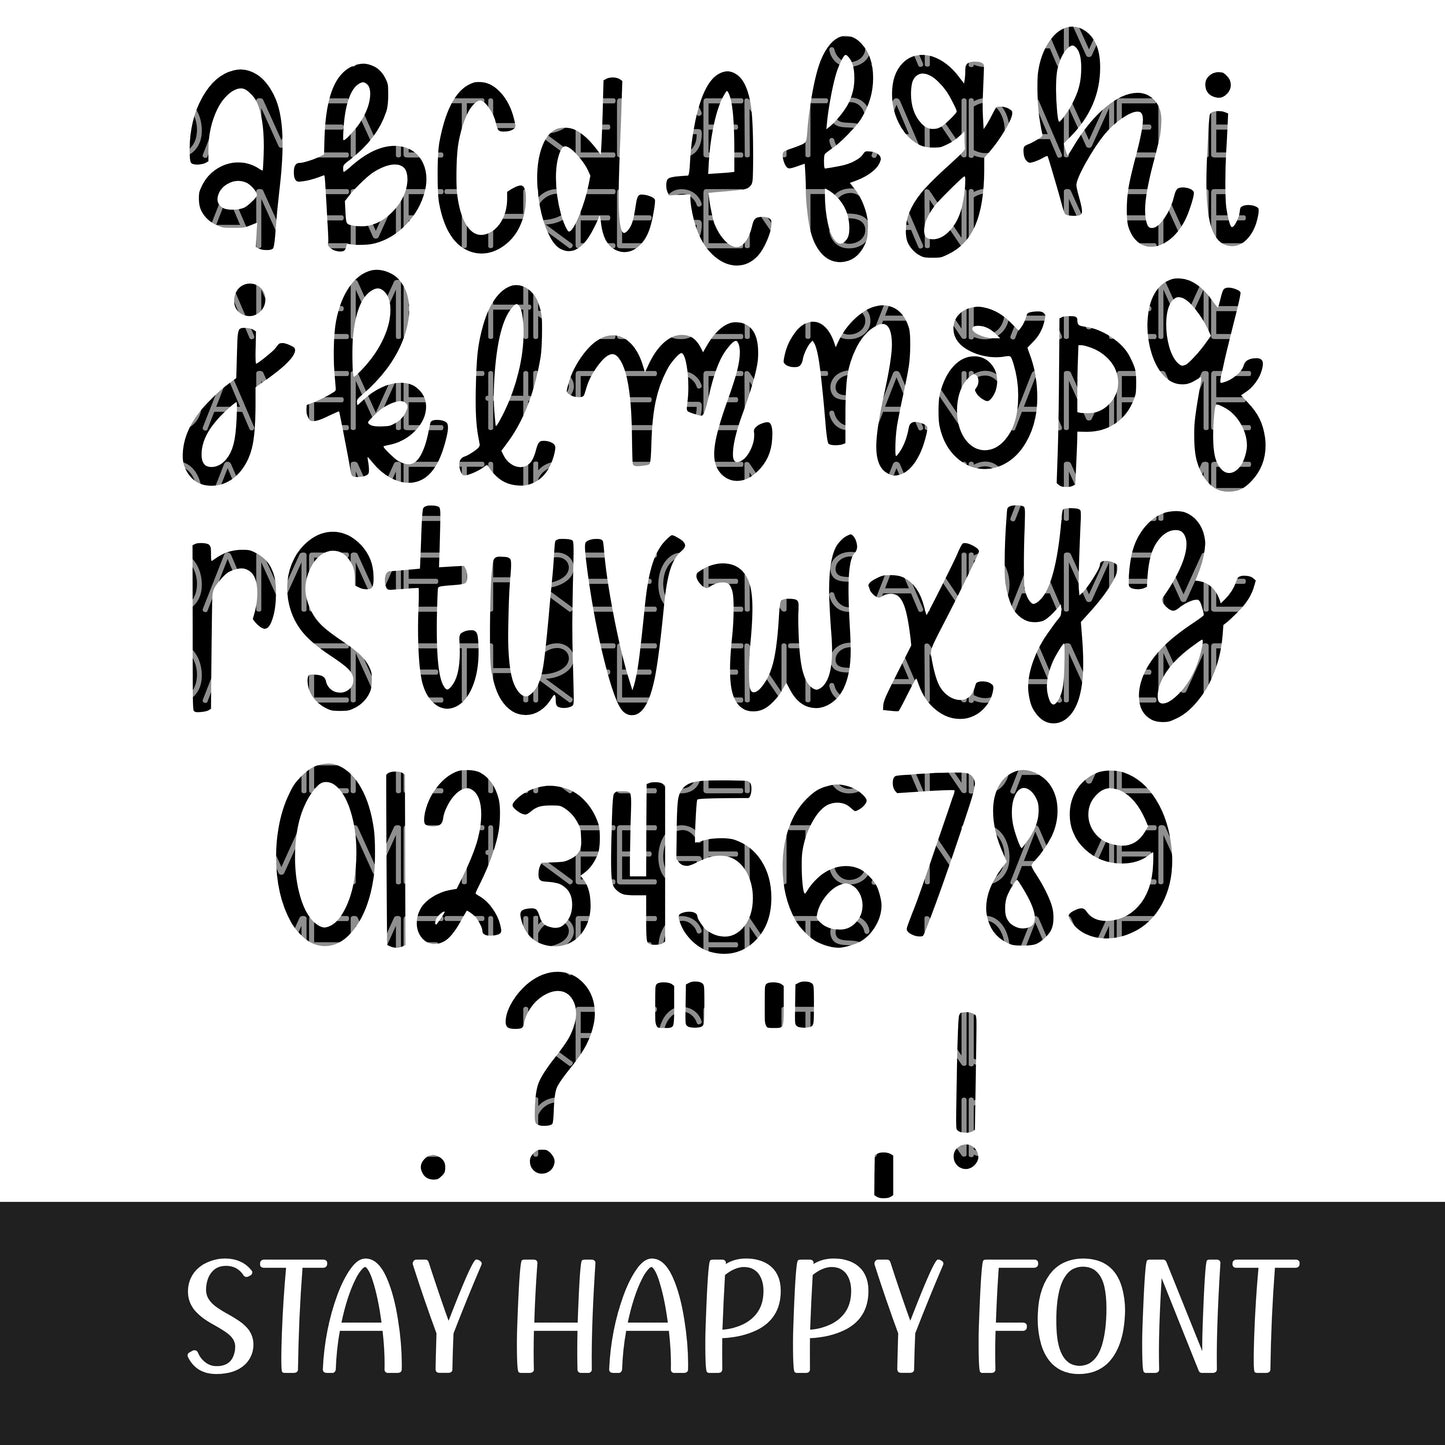 STAY HAPPY FONT